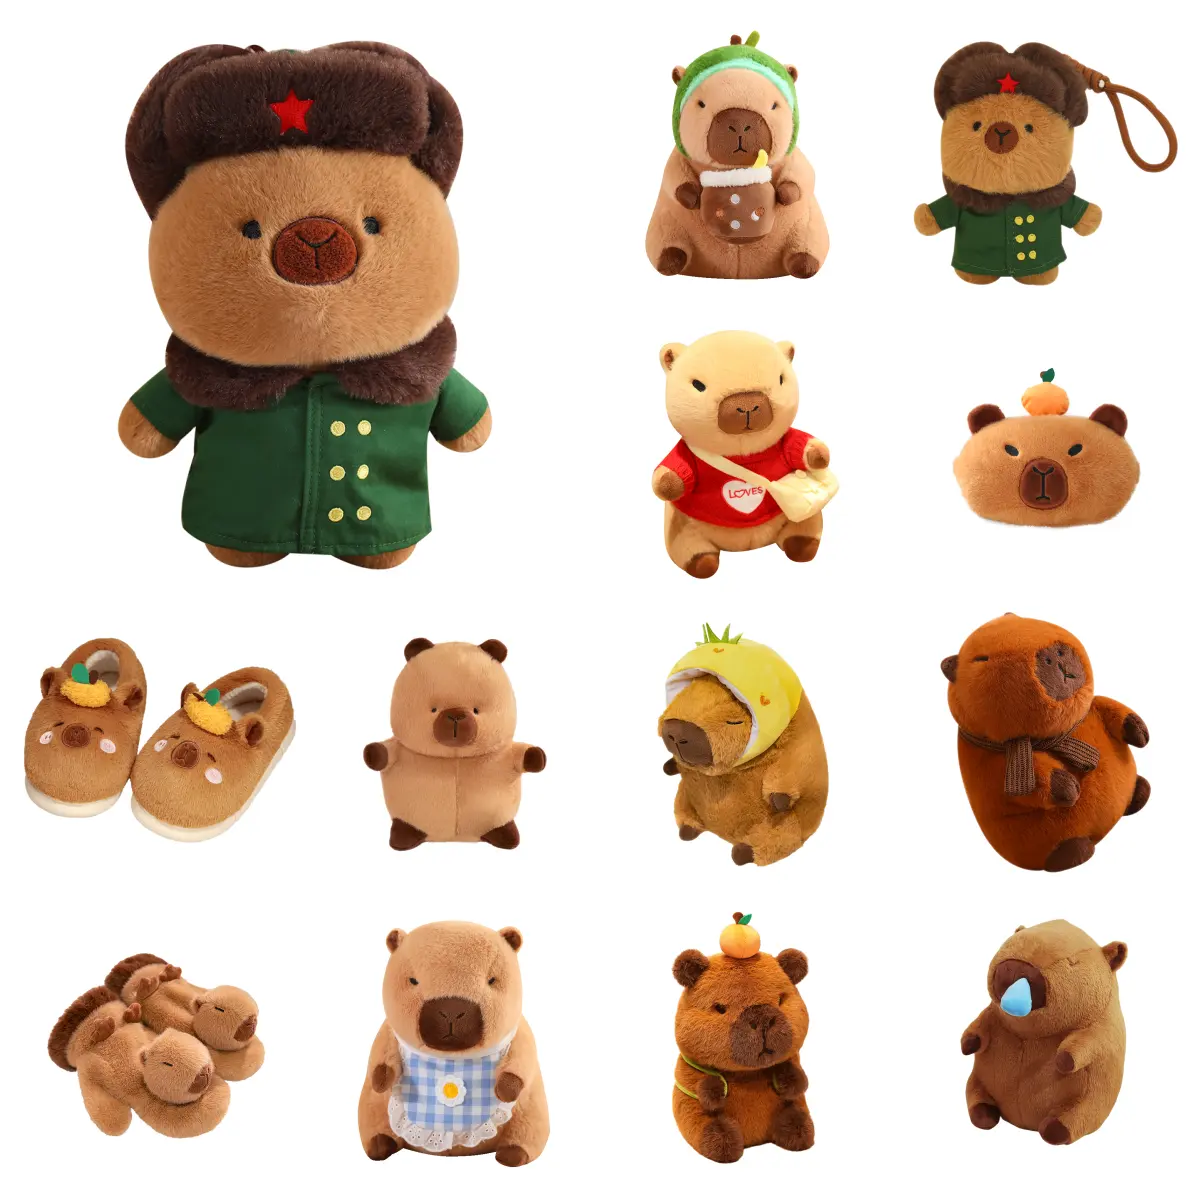 OEM kawaii and Cute Plushies Animal Doll Peluches capybara Head Covers Hanging doll Various Styles Can Be Used As Gifts